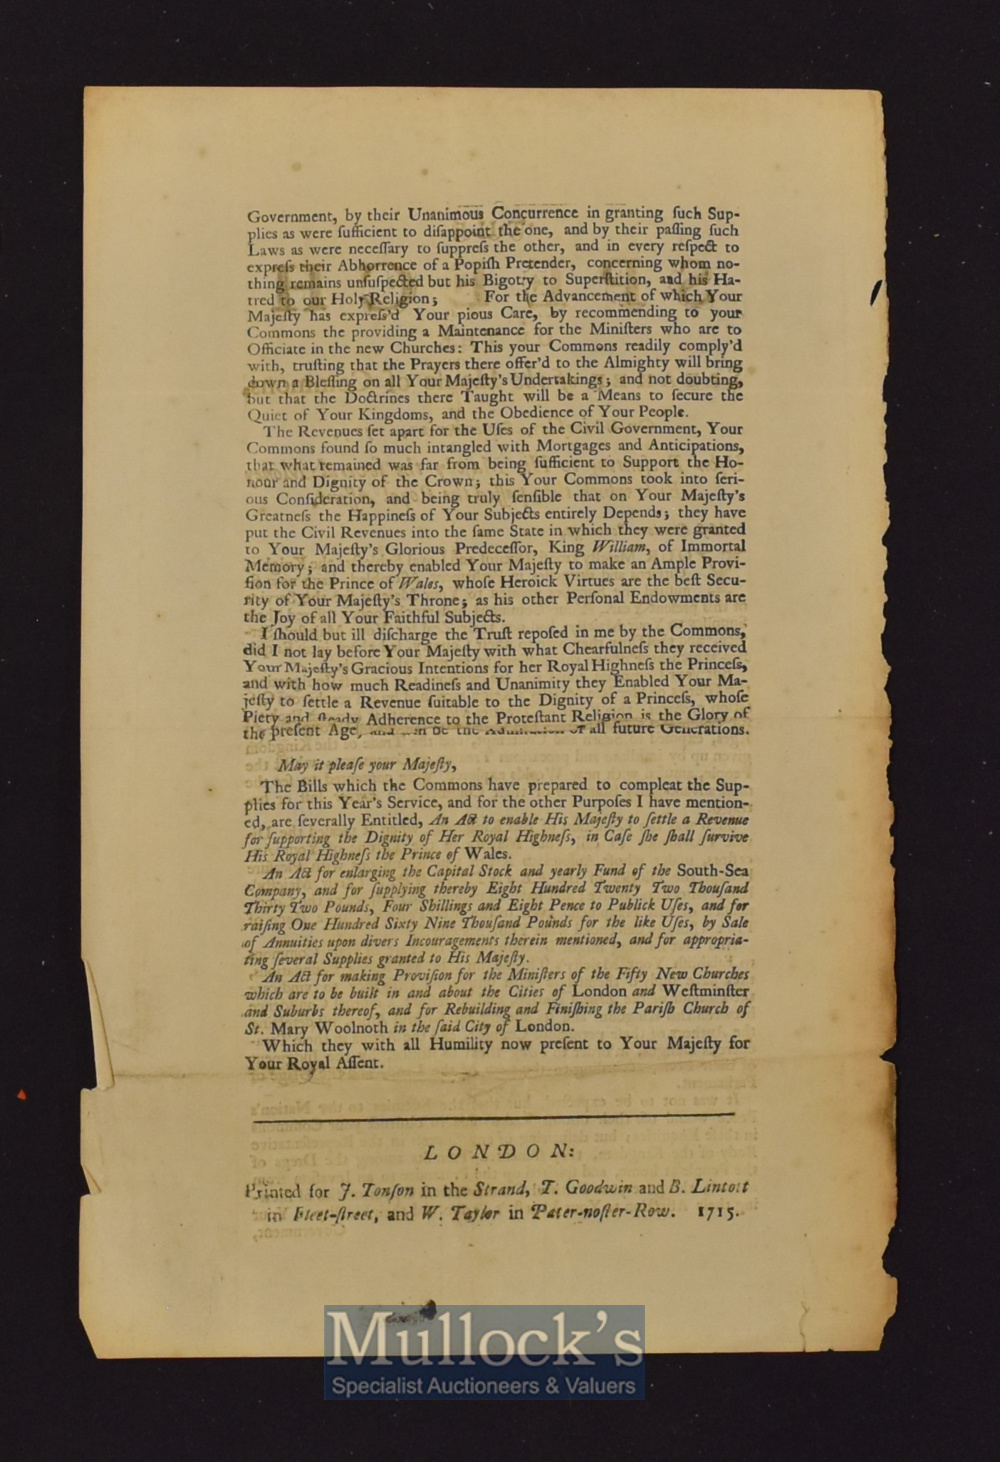 The Speech of the Speaker of the House of Commons 1715 ‘South Sea Company’ Sept 21, upon - Image 2 of 2